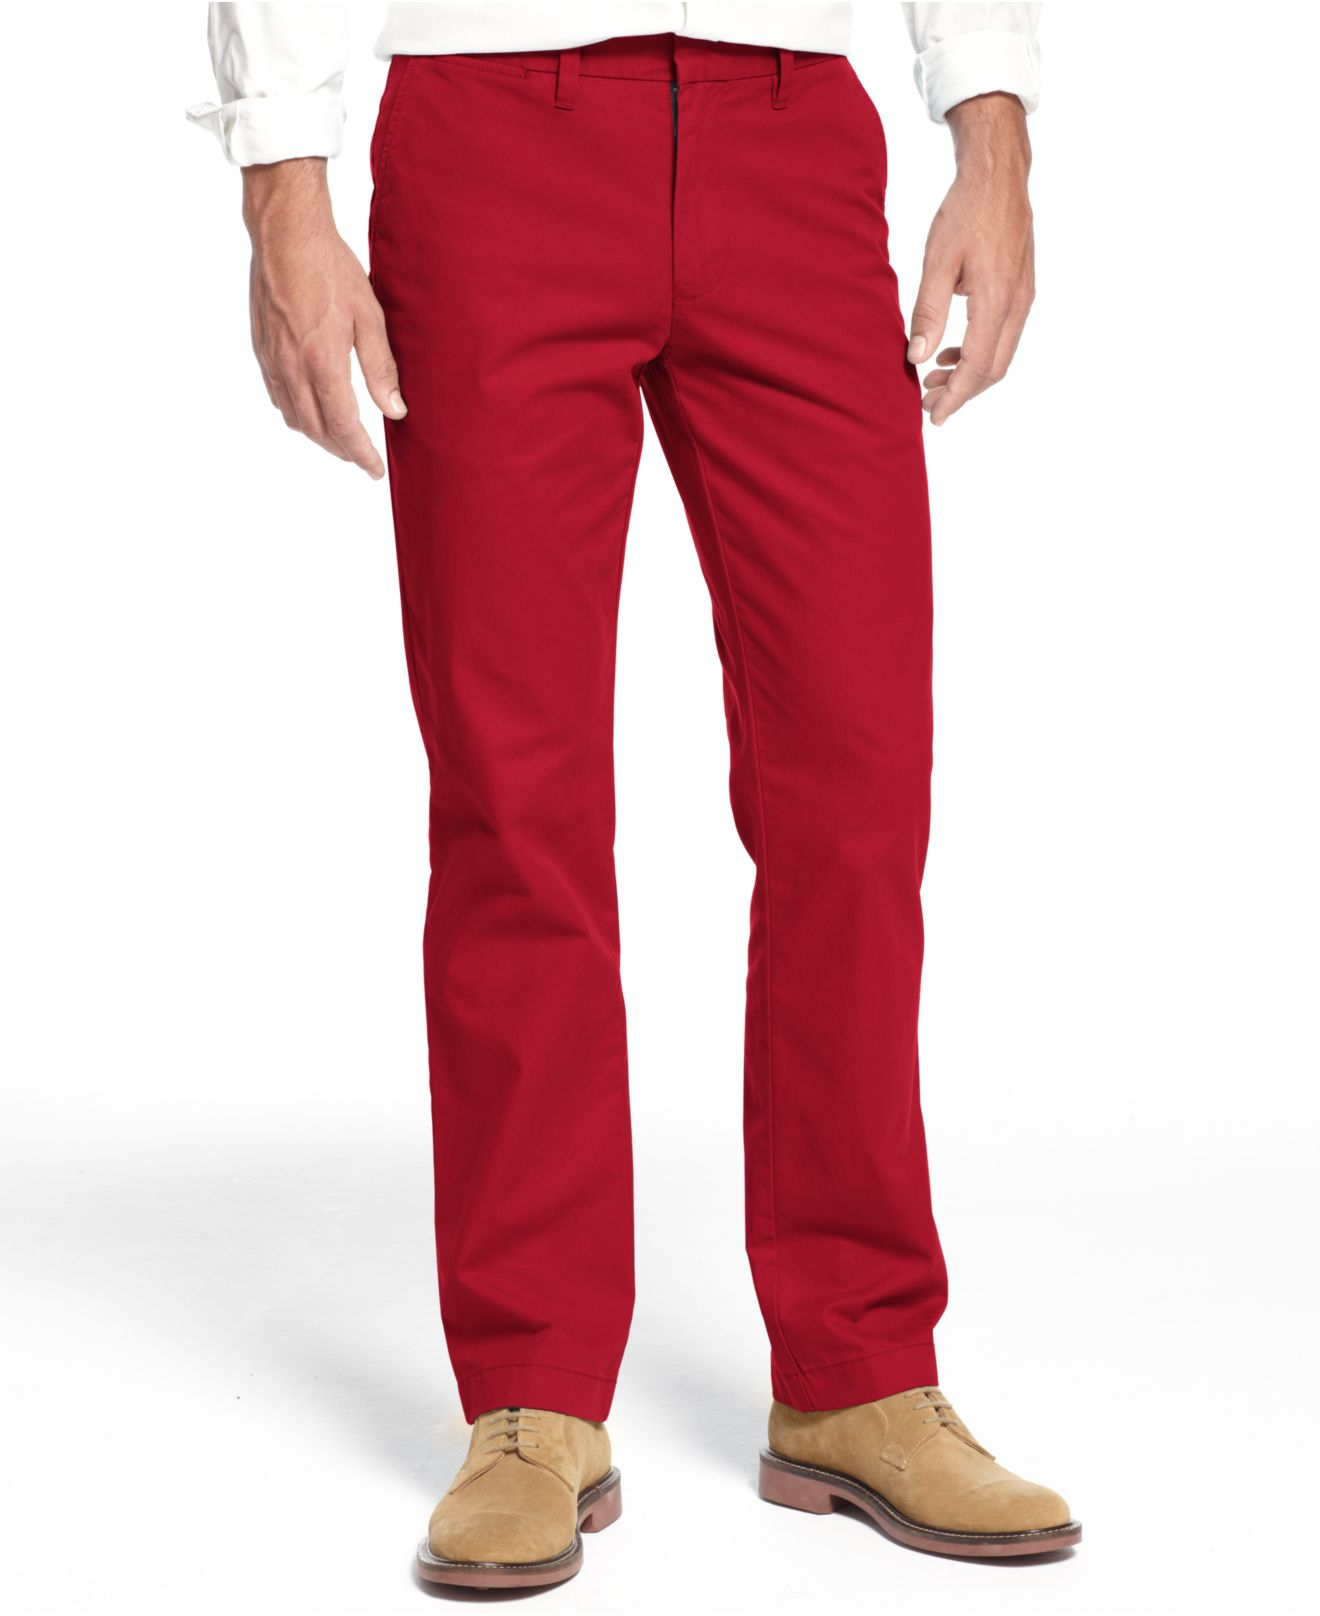 Lyst - Tommy Hilfiger Mercer Custom-Fit Chino Pants in Red for Men